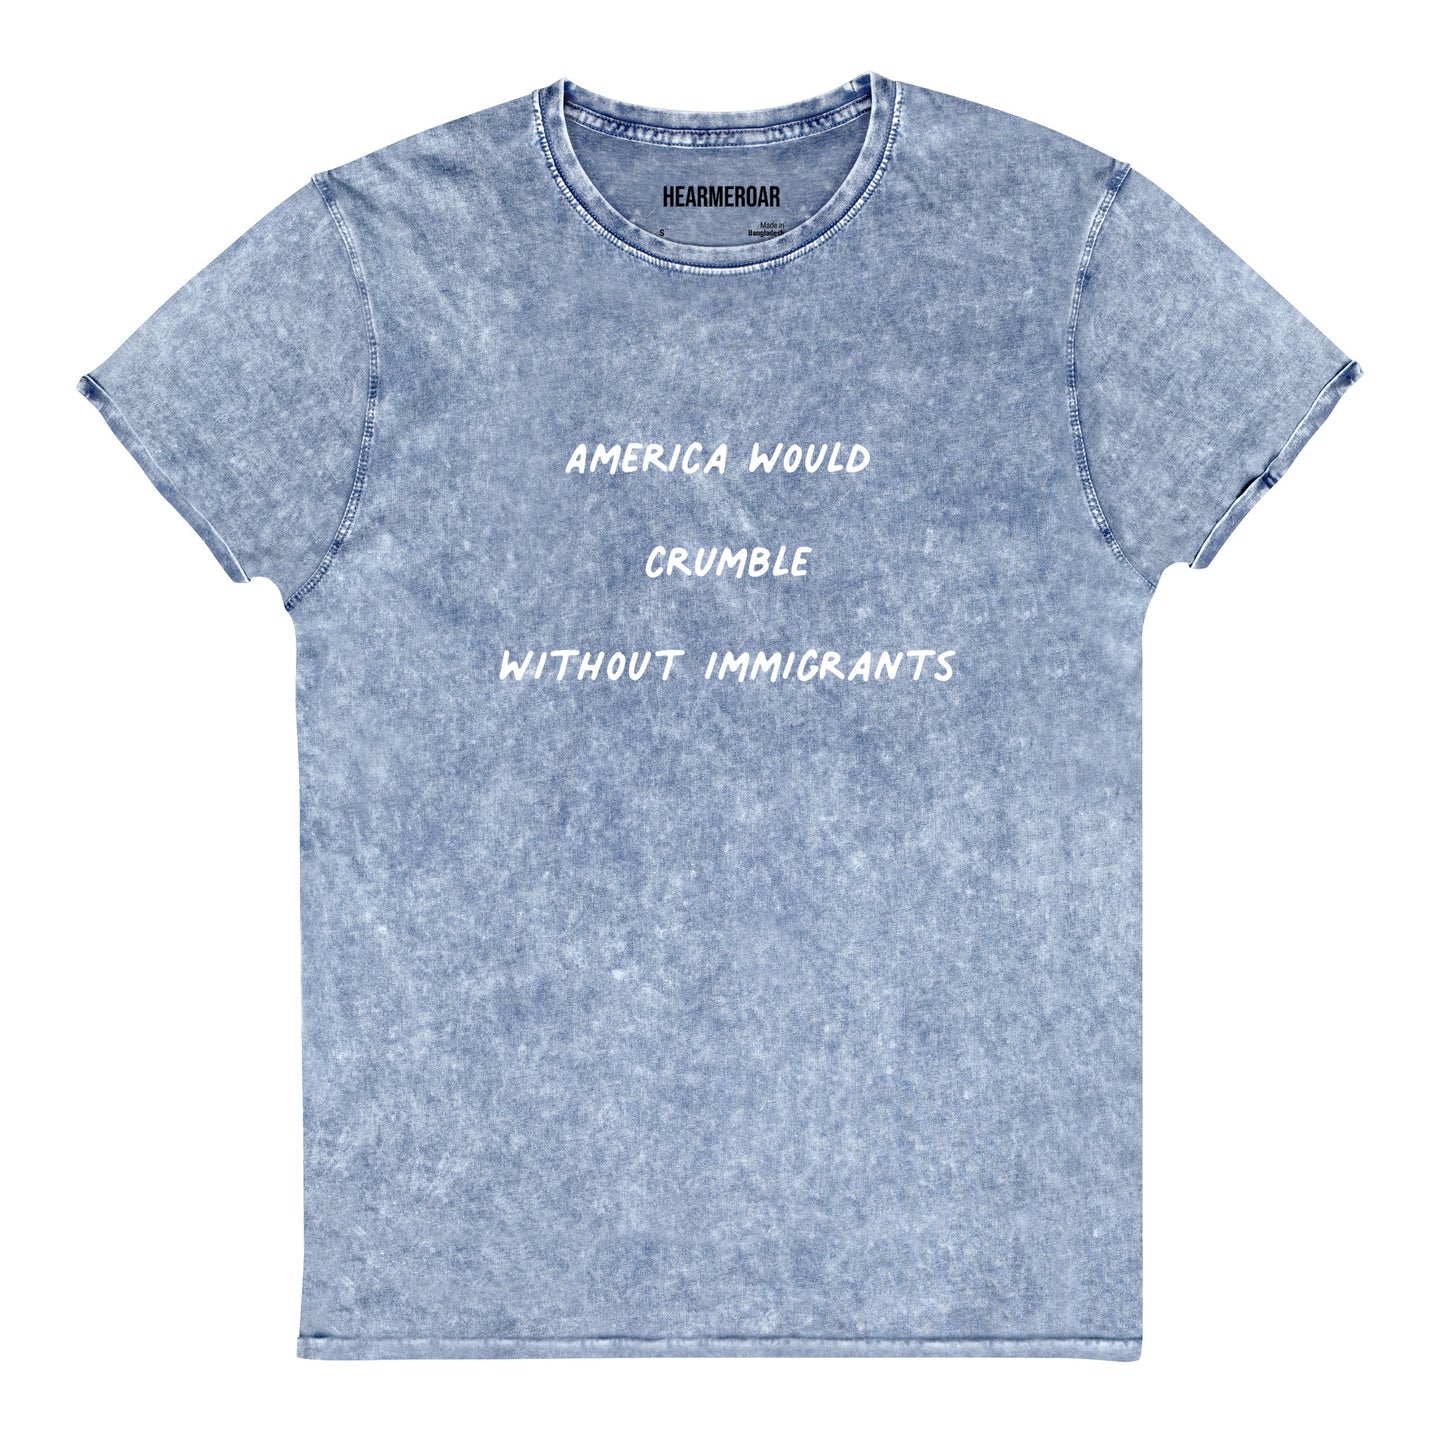 America Would Crumble Without Immigrants Denim Unisex T-Shirt